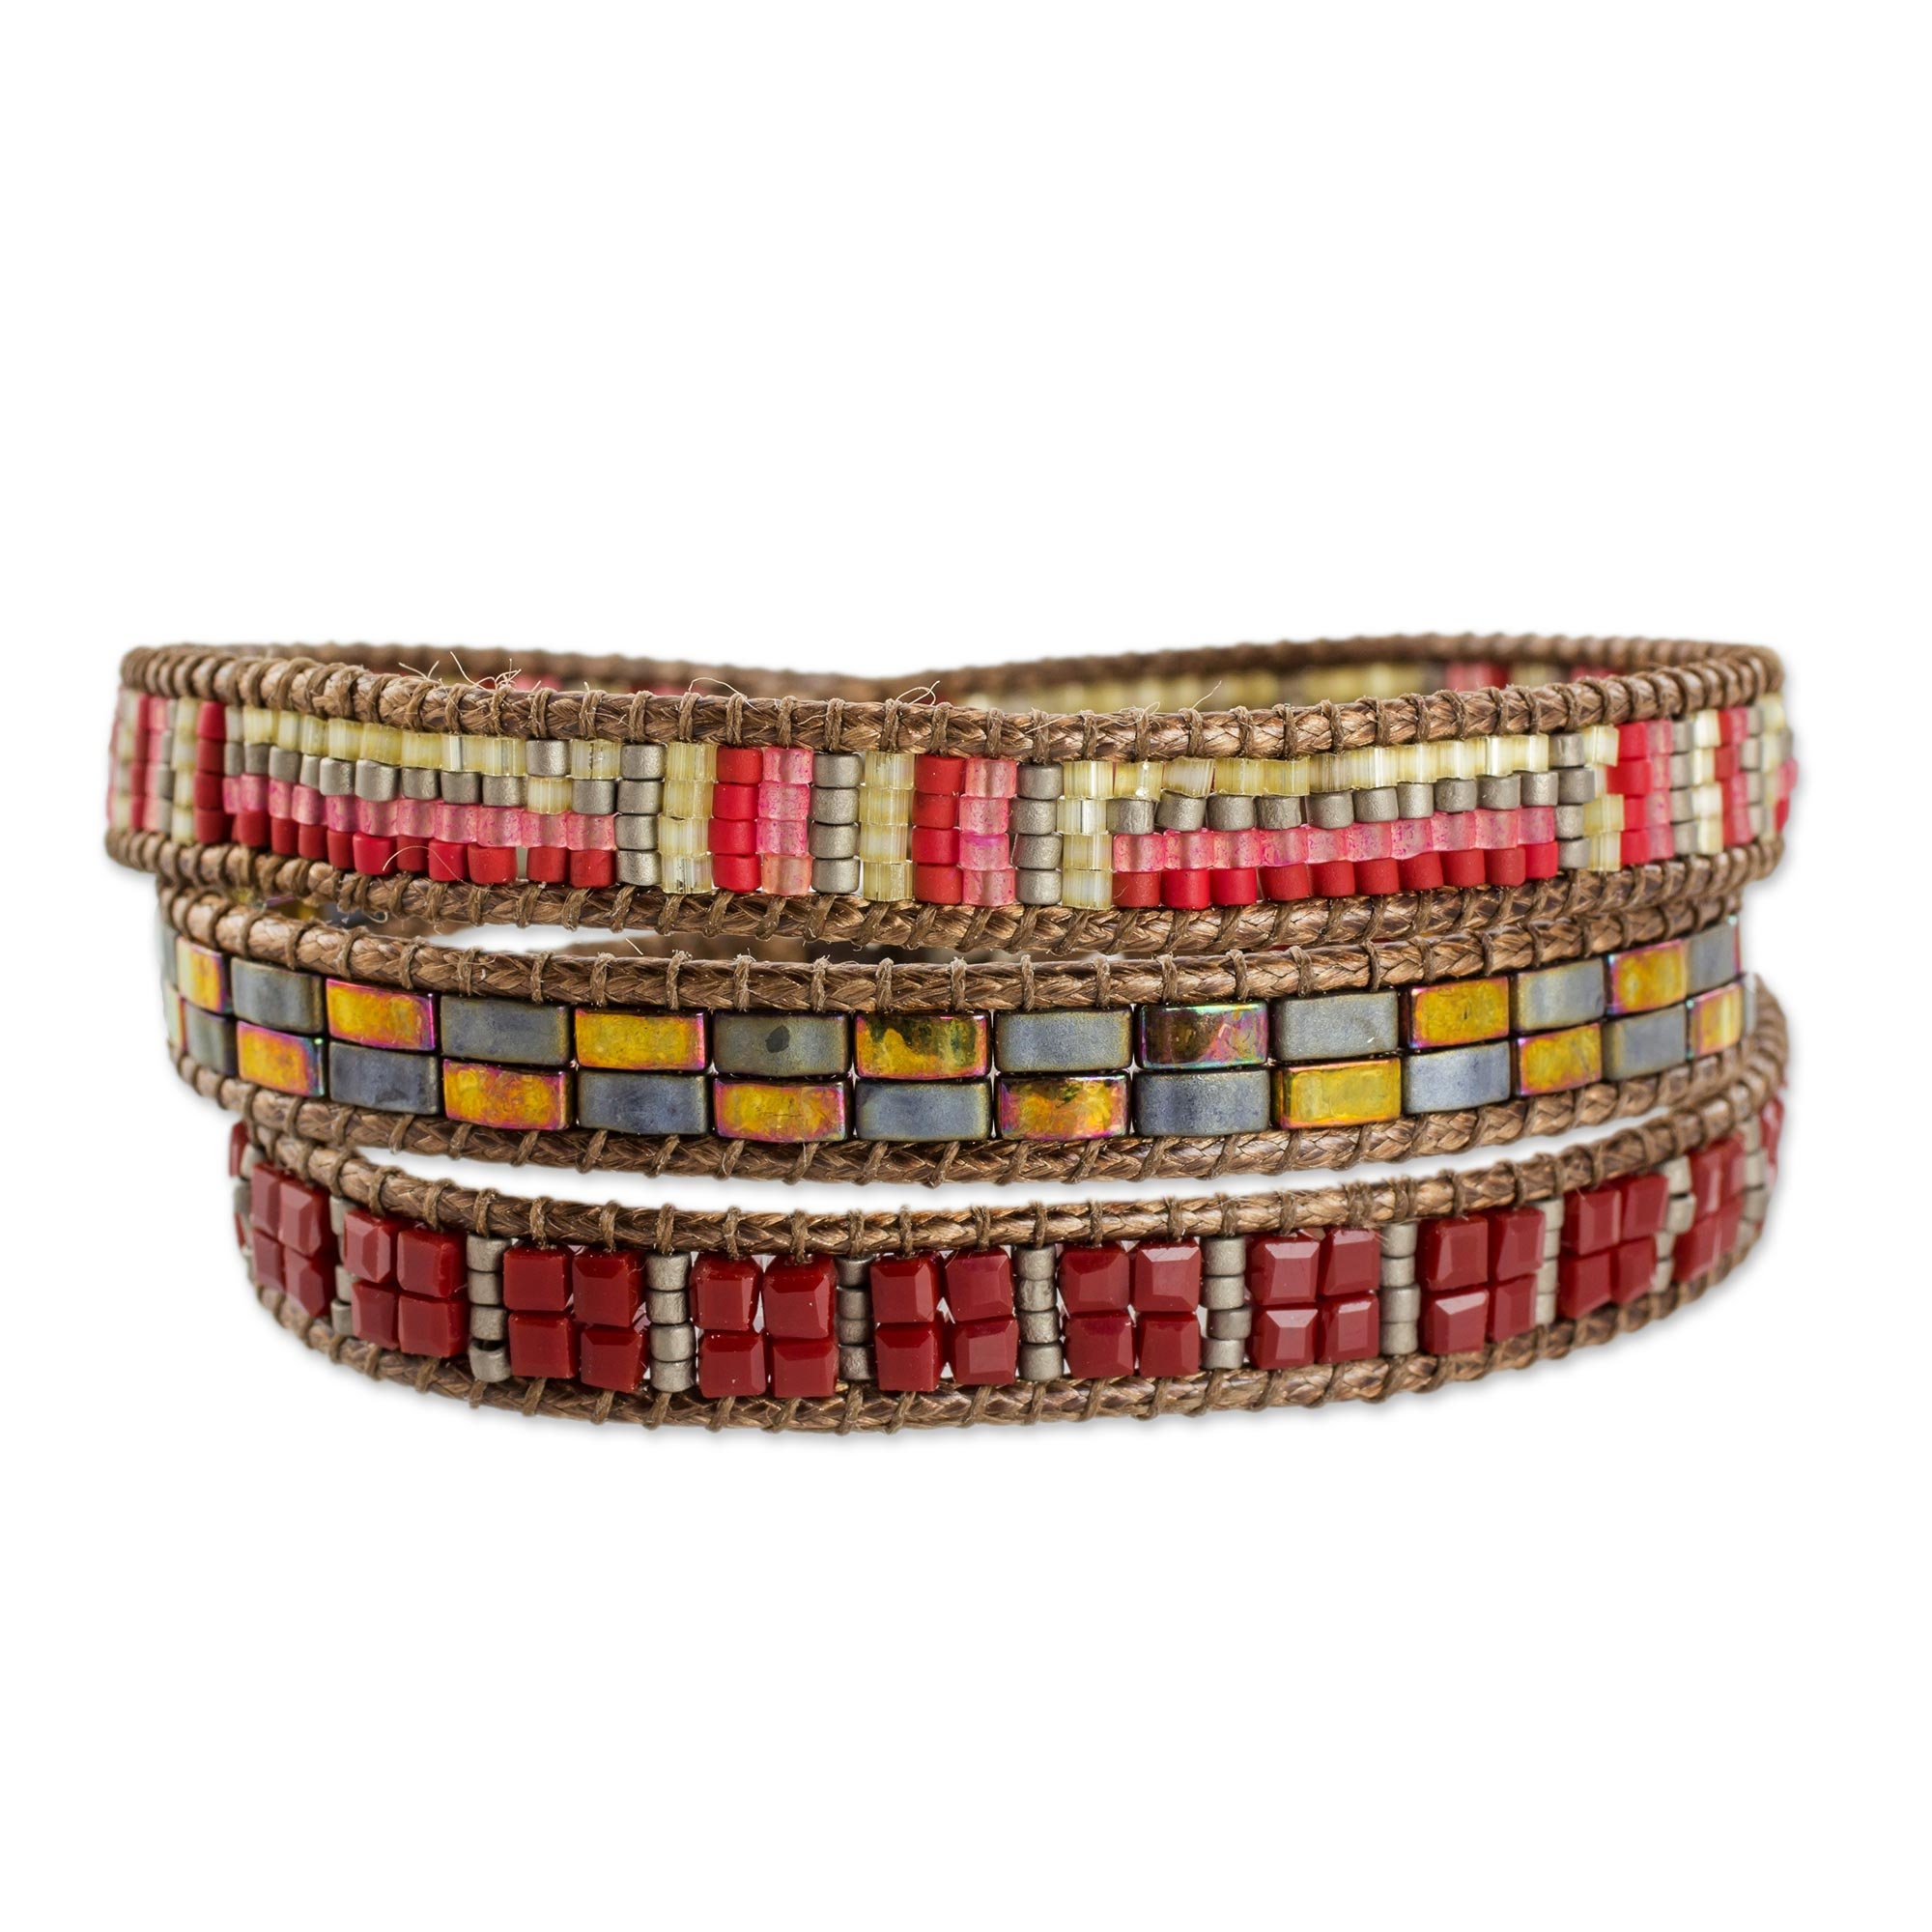 Red and Multi-Color Glass Beaded Wrap Bracelet - Fiery Sizzle | NOVICA